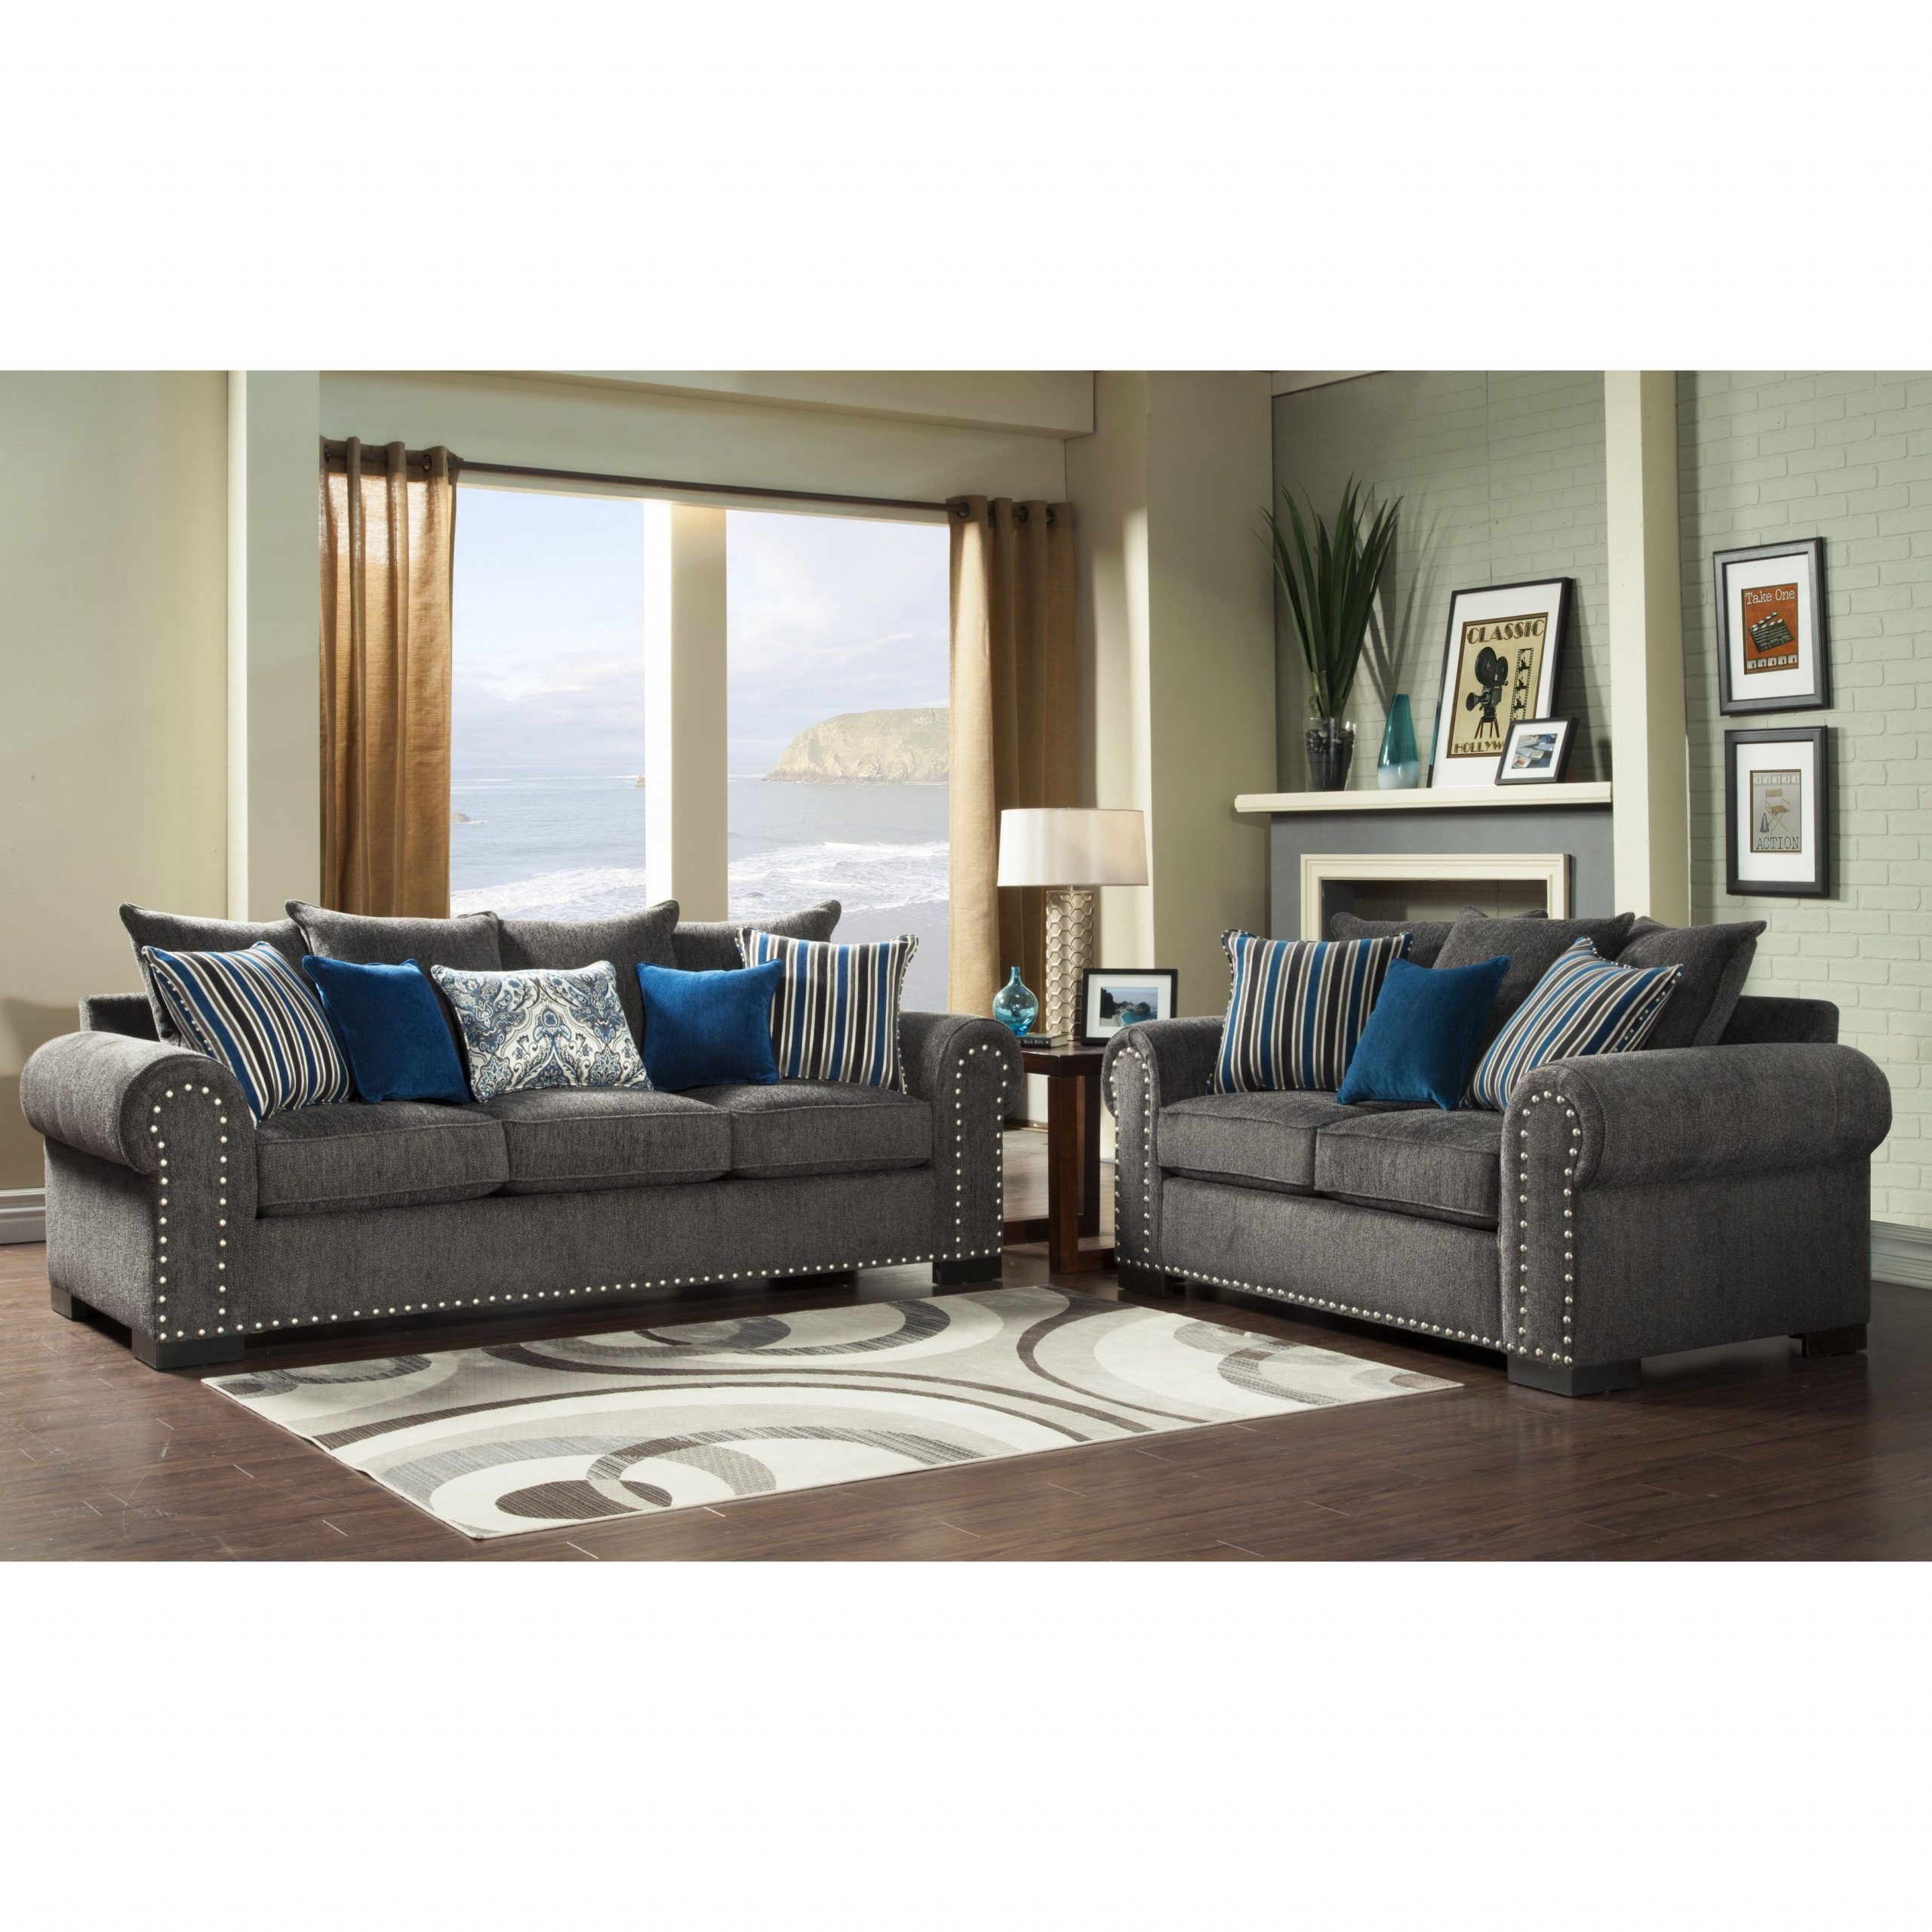 Our Best Living Room Furniture Deals | Sofa And Loveseat Inside Molnar Upholstered Sectional Sofas Blue/gray (View 8 of 15)